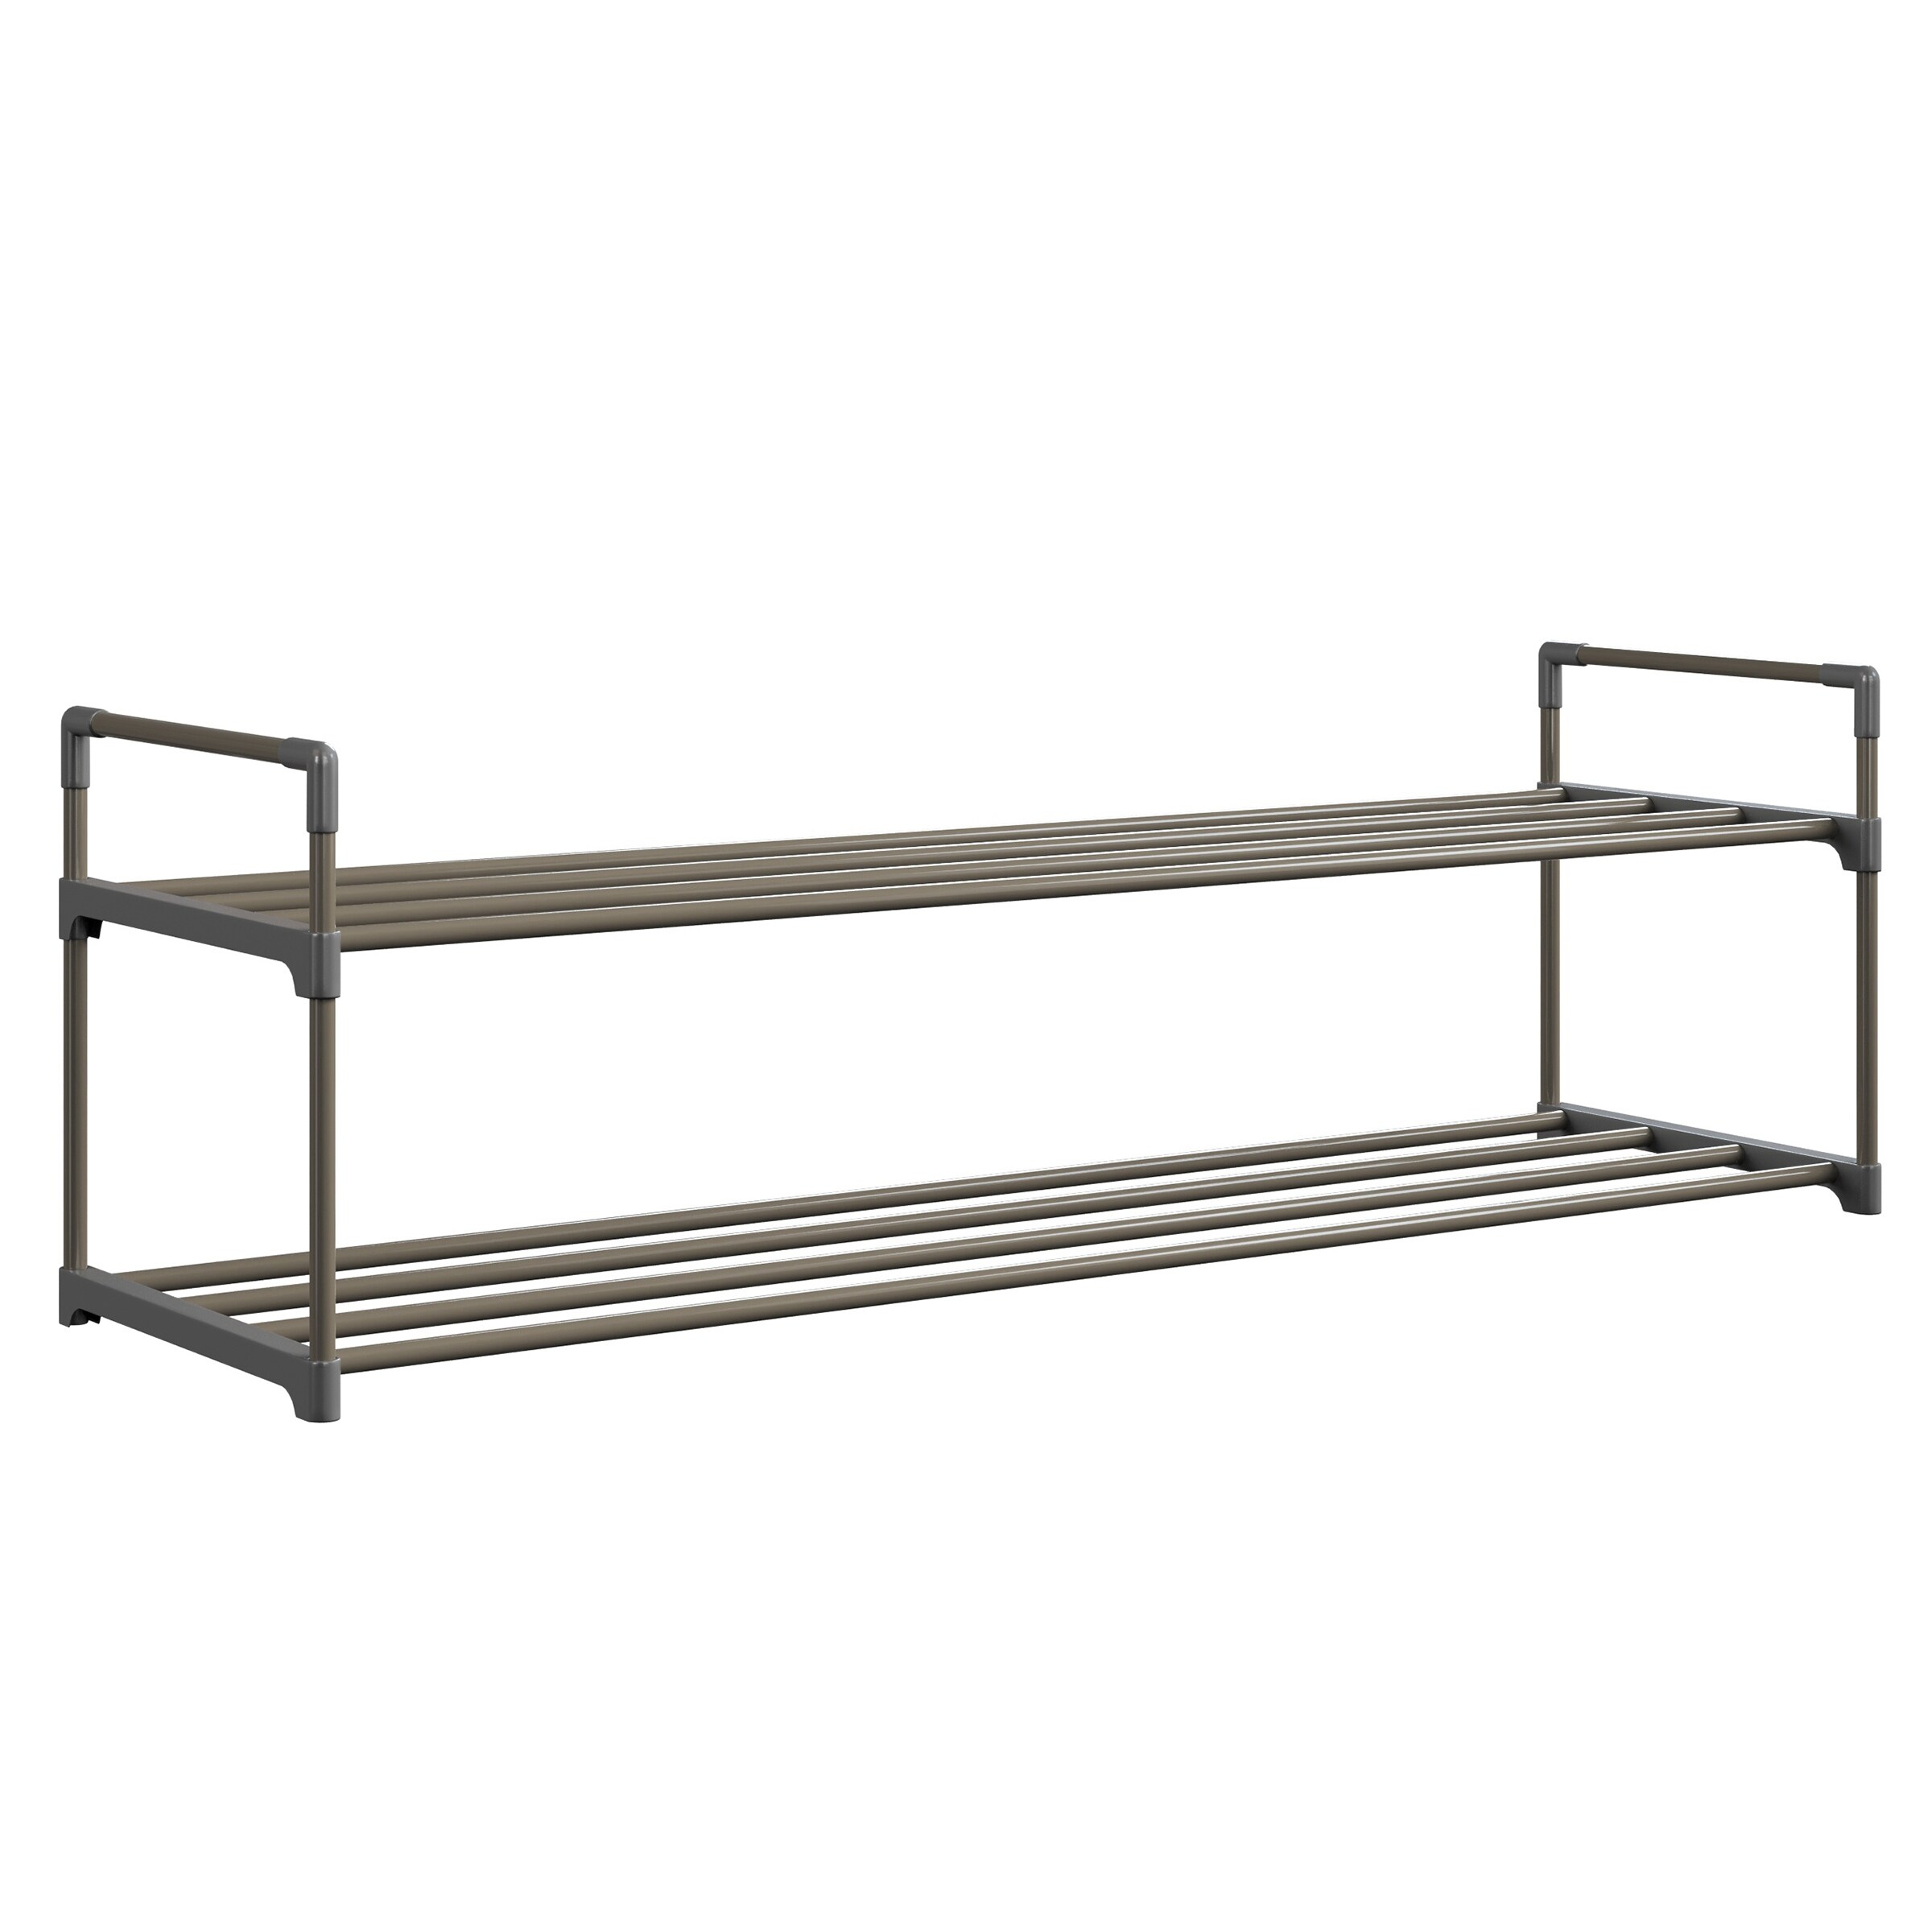 https://ak1.ostkcdn.com/images/products/is/images/direct/c4bba437520ada571050c3b894f7994e955f1948/Shoe-Rack---2-Tier-Shoe-Organizer-Shelf-Holds-10-Pairs-Sneakers%2C-Heels%2C-Boots-by-Home-Complete-%28Gray%29.jpg